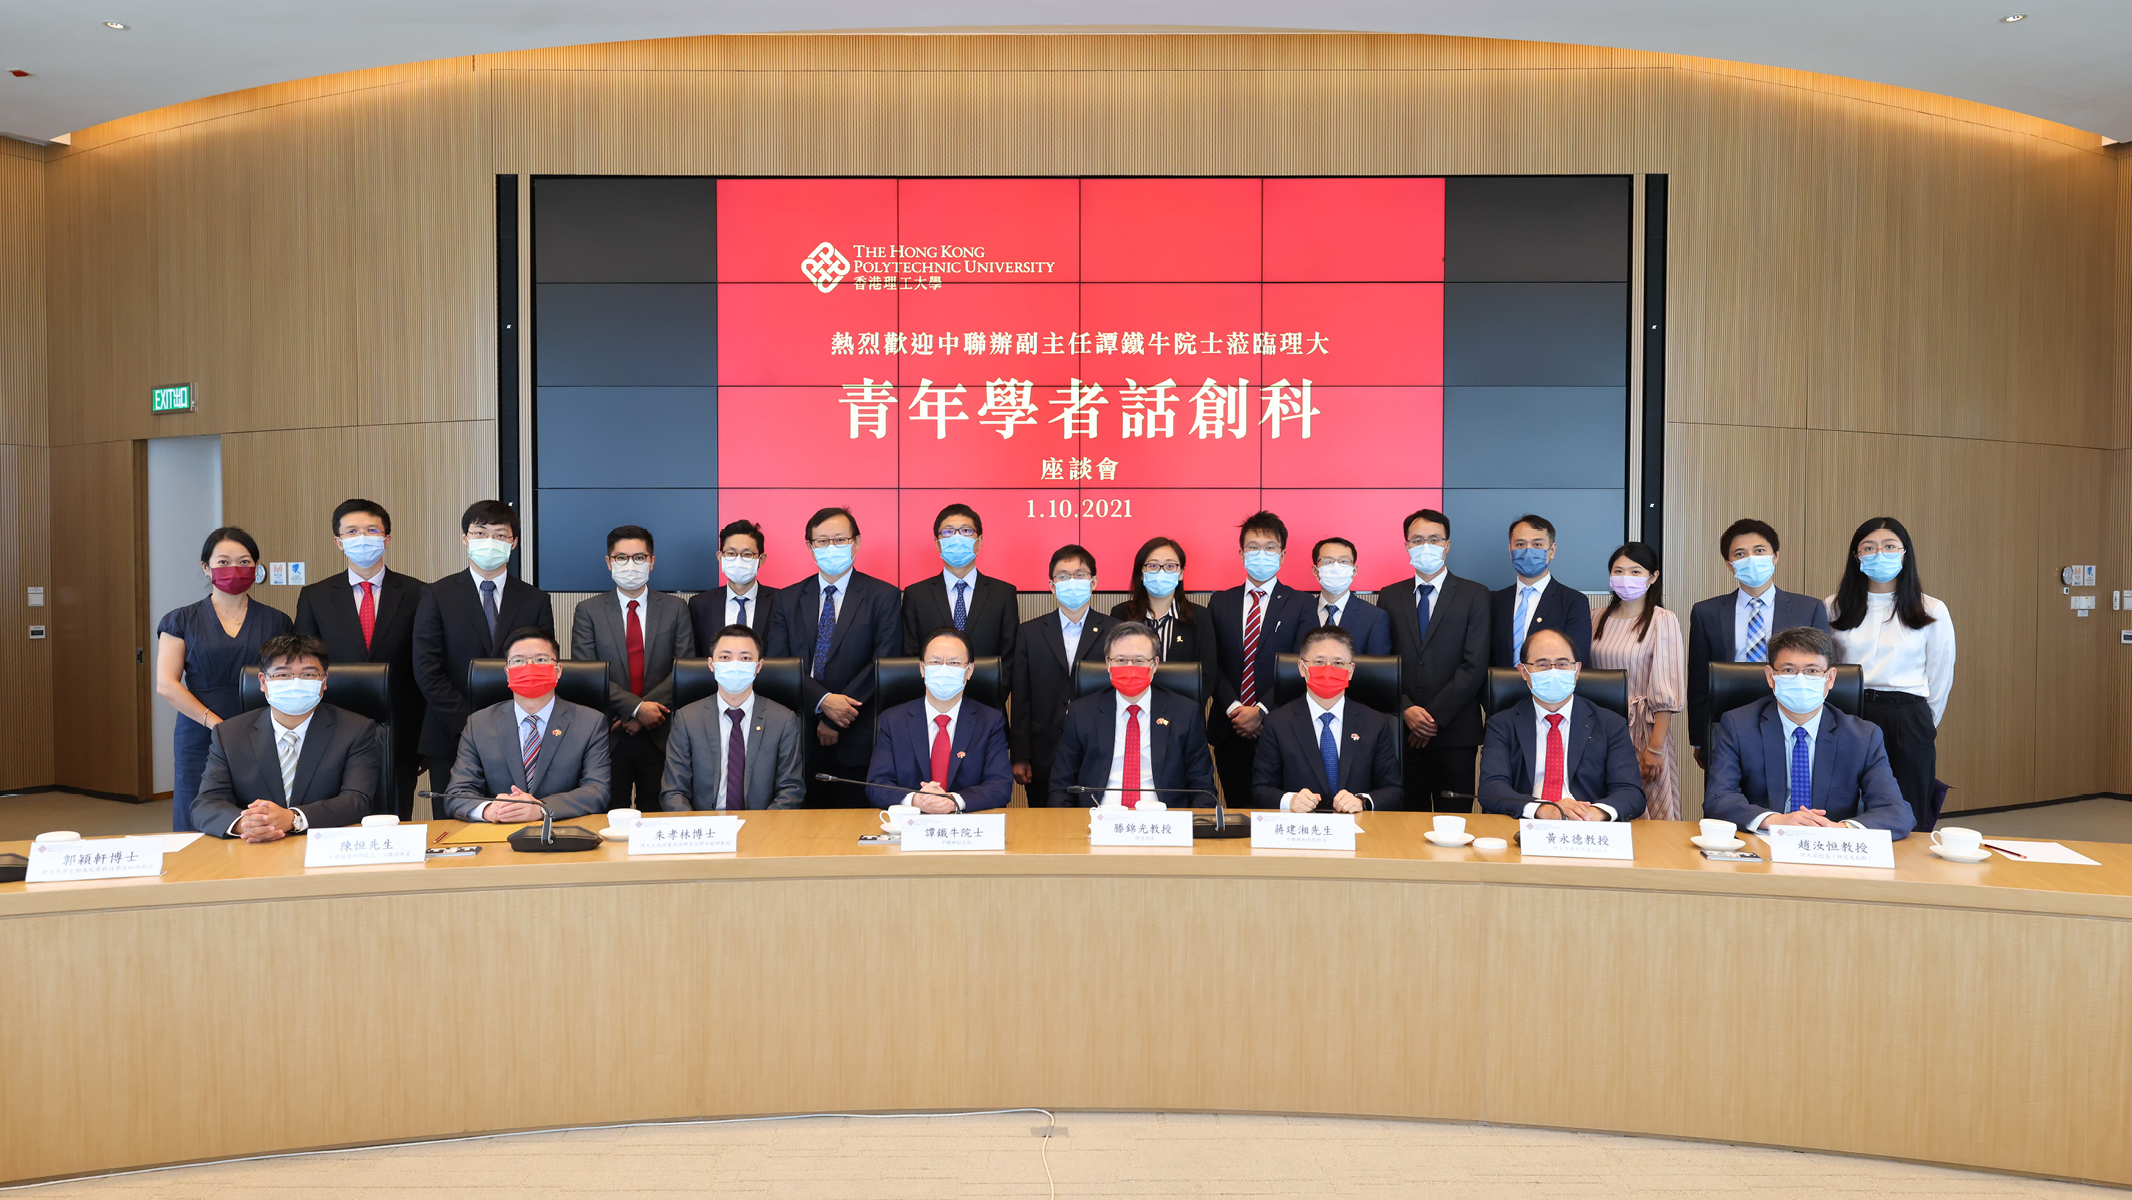 President Jin-Guang Teng and Professor Tan Tieniu (front row, fourth and fifth from right) joined an exchange session with young scholars.